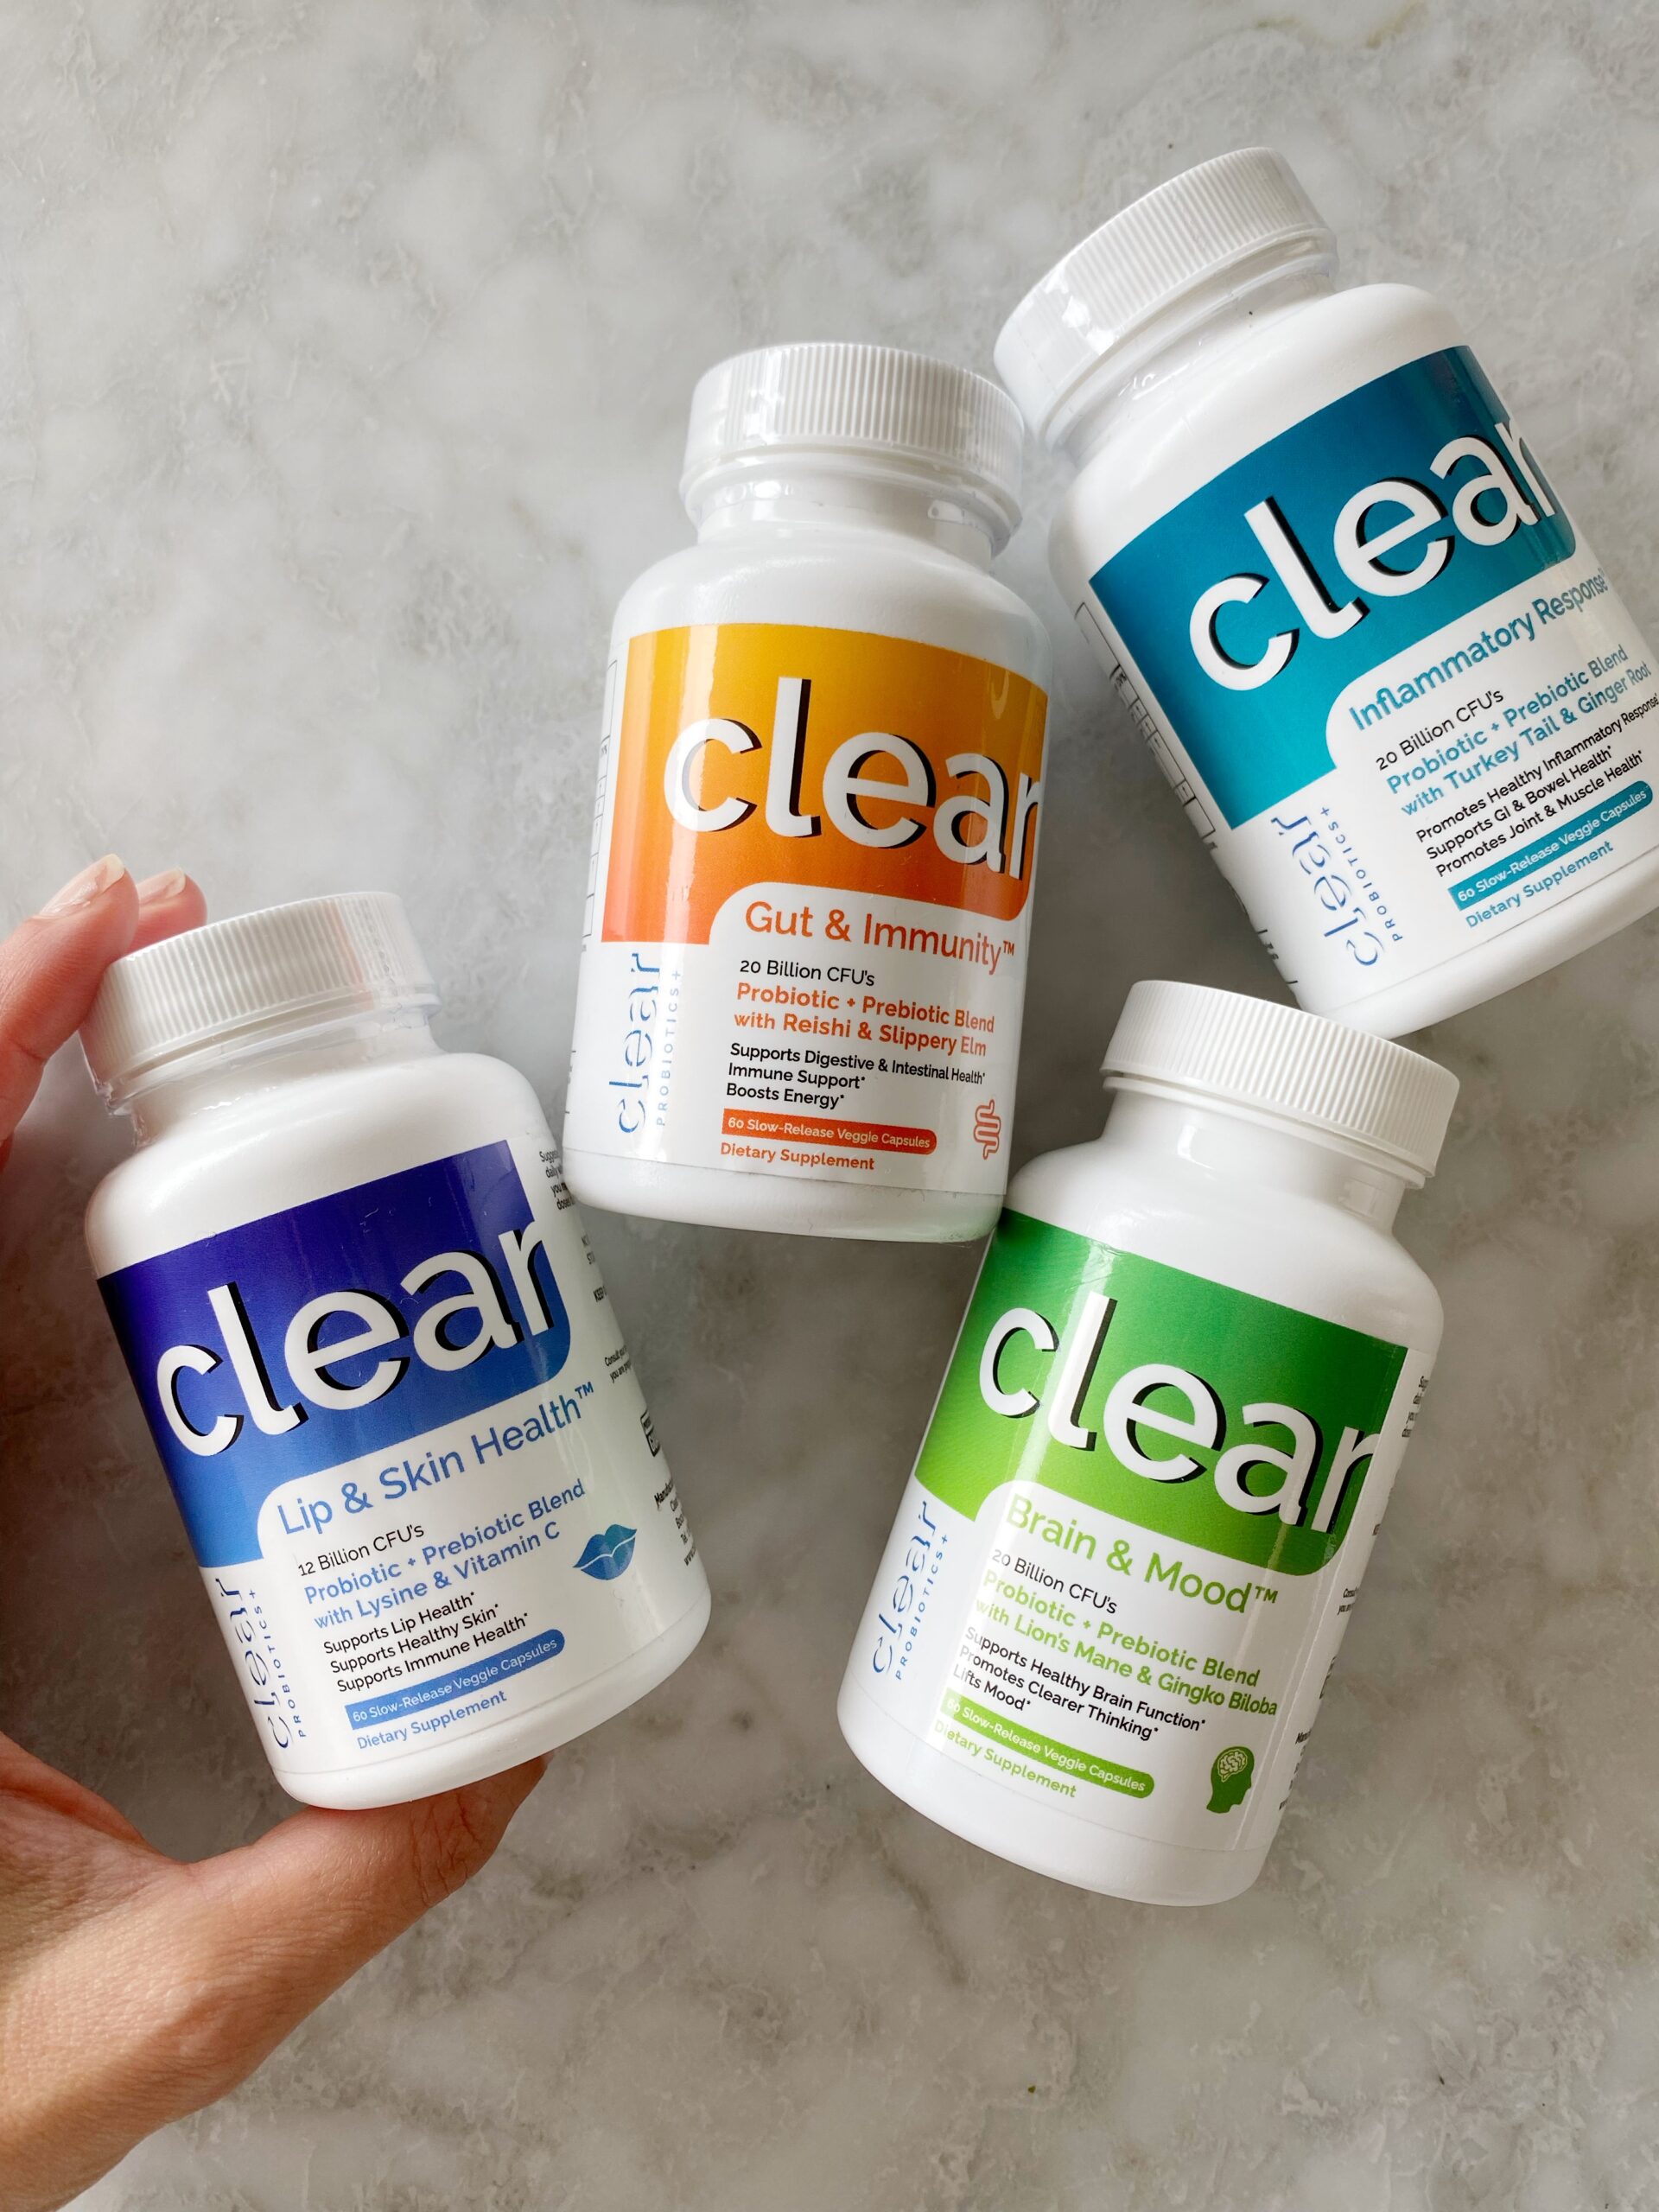 clear probiotics scaled - Why Clear Probiotics is More Than Just a Probiotic for Digestion